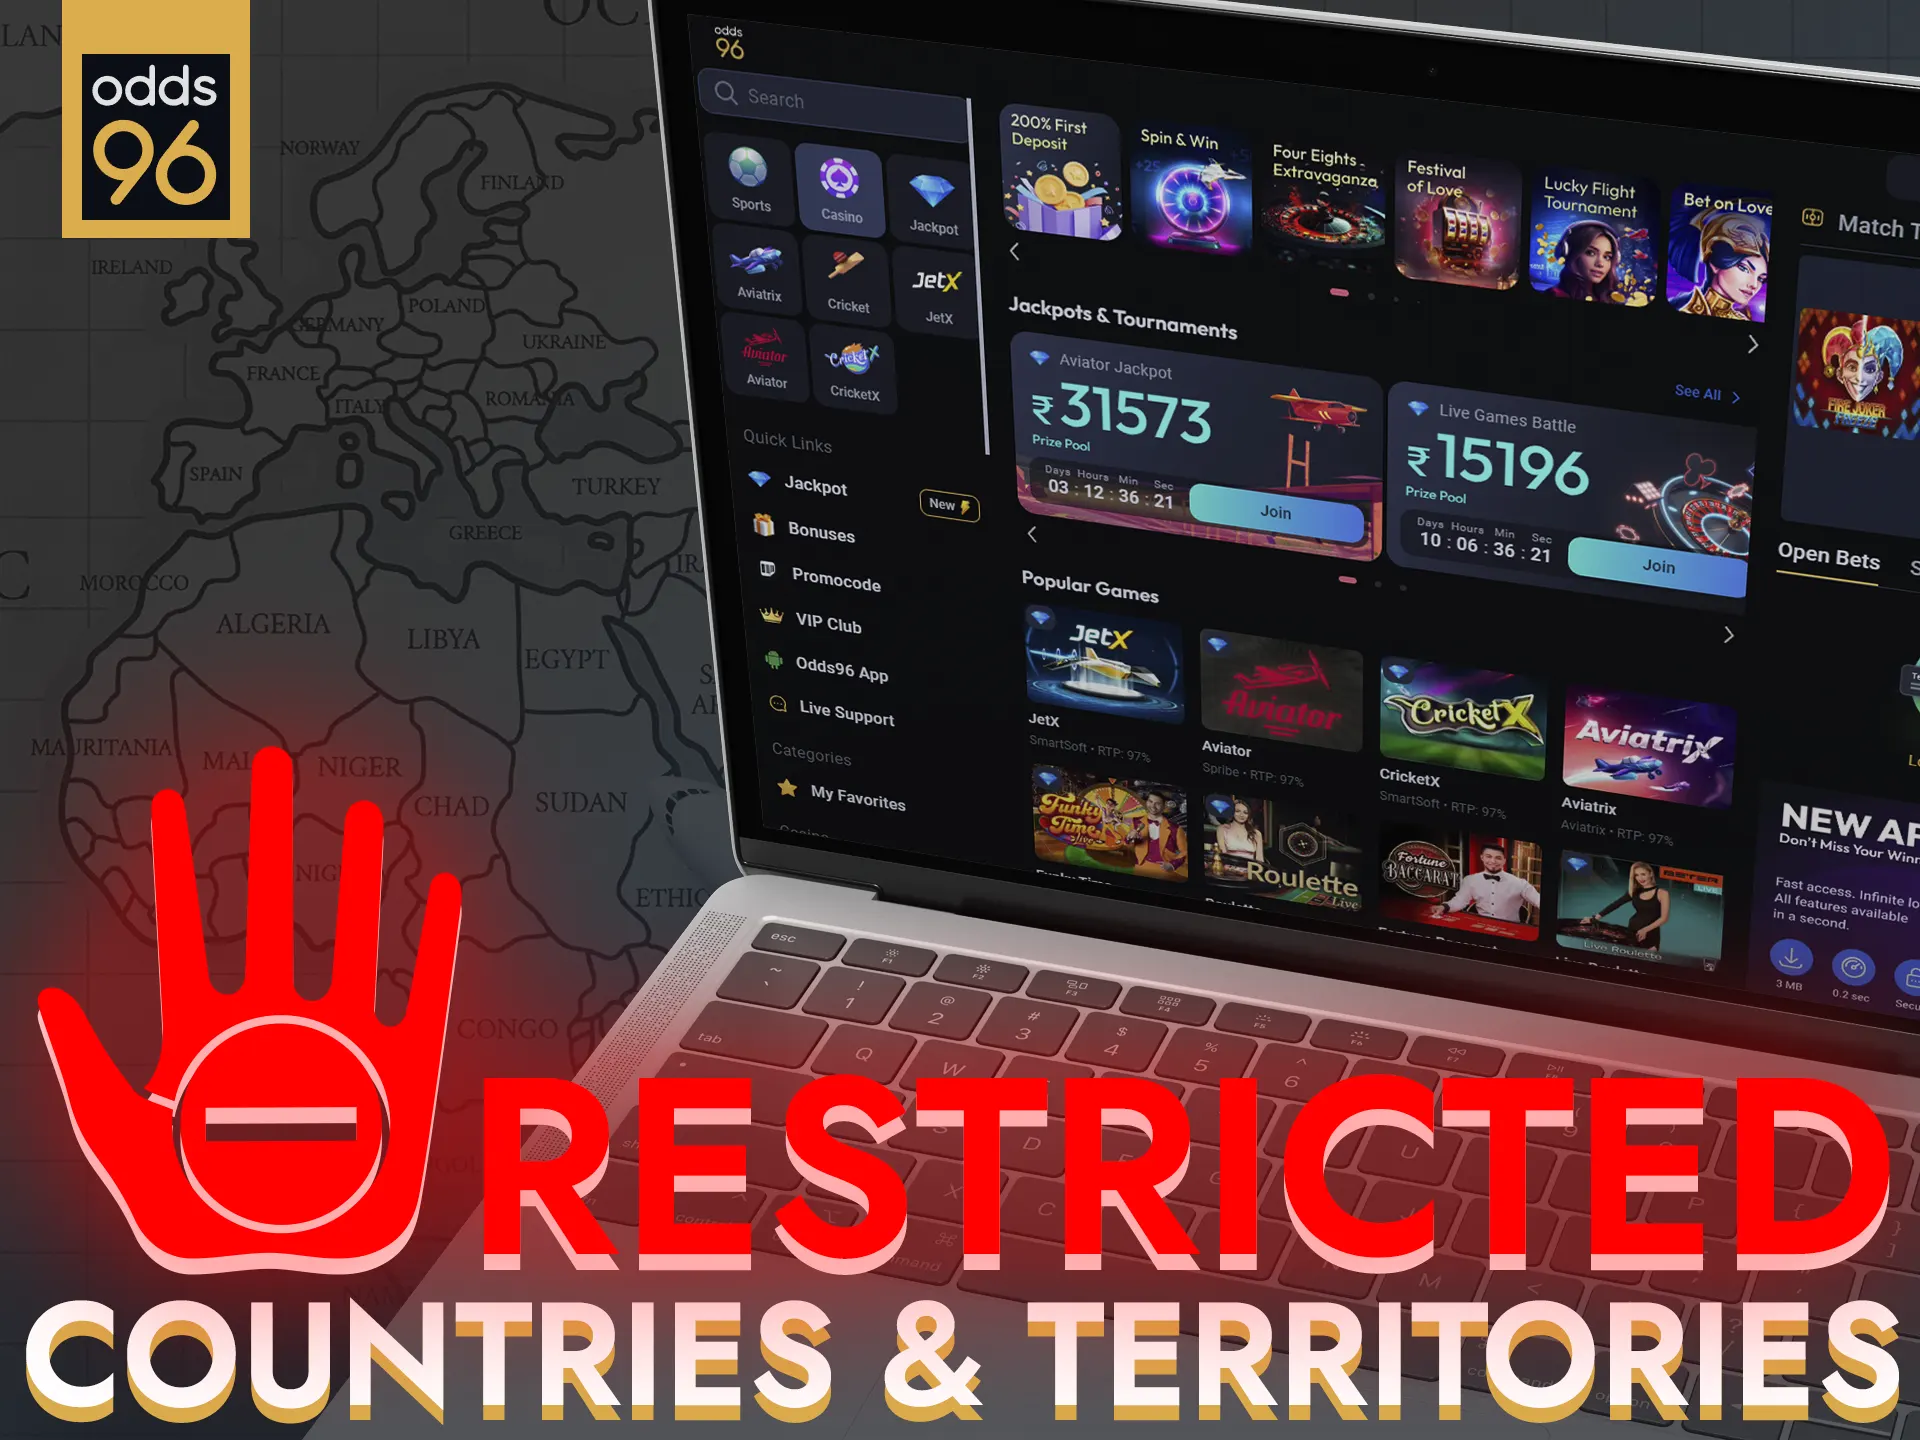 Odds96 is restricted in certain countries.